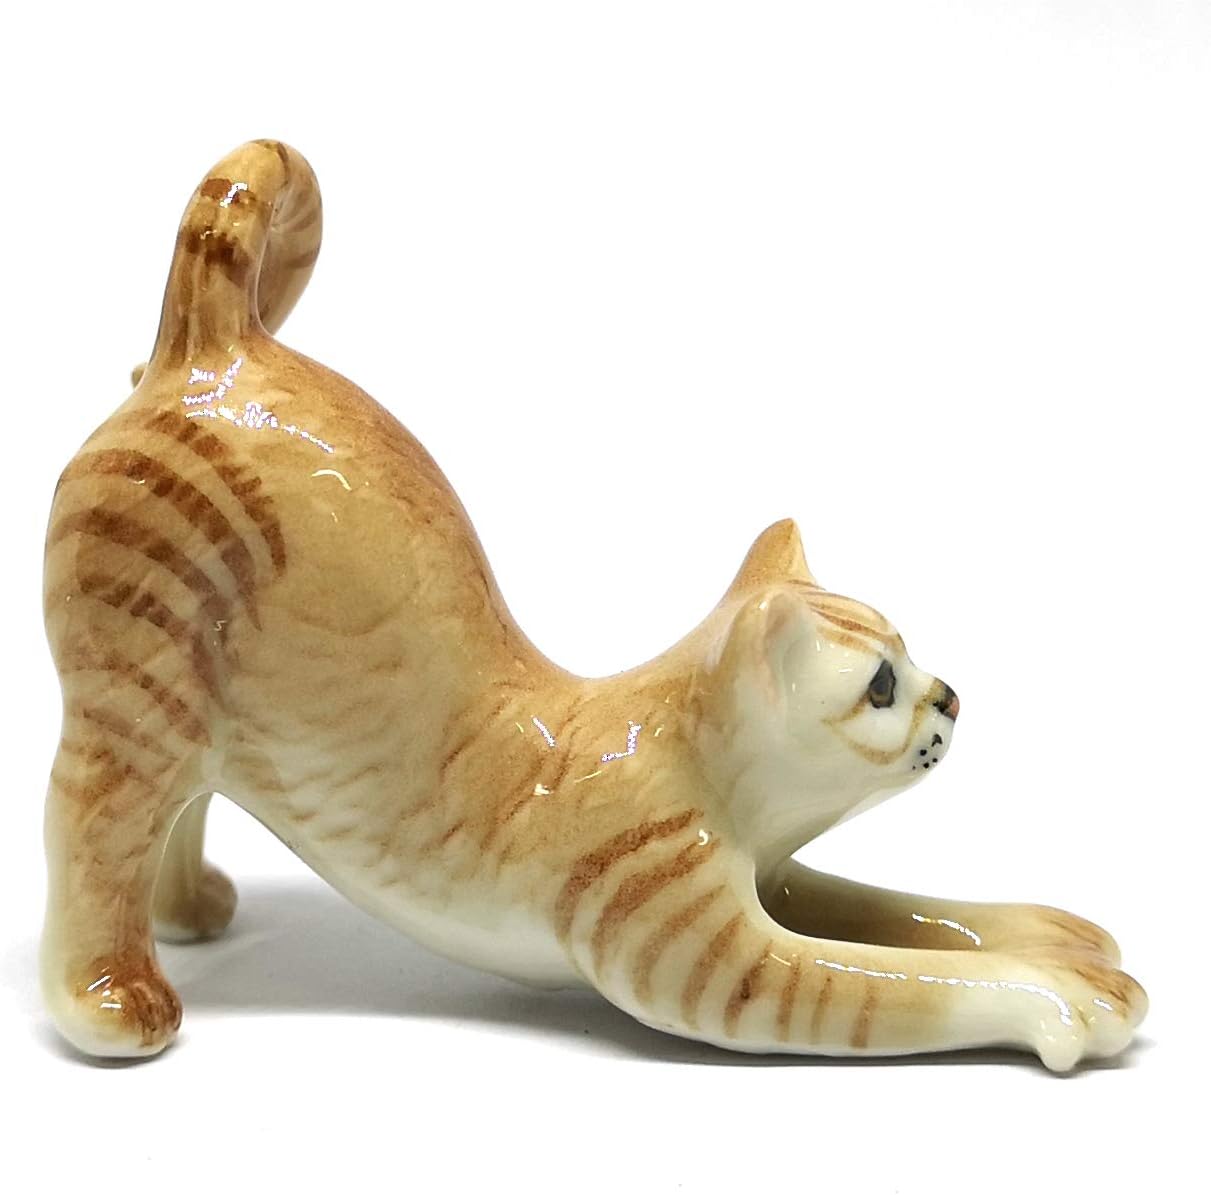 Collectible Gray & Brown Yoga Cat Figurine Ceramic Hand-Painted Home Decor